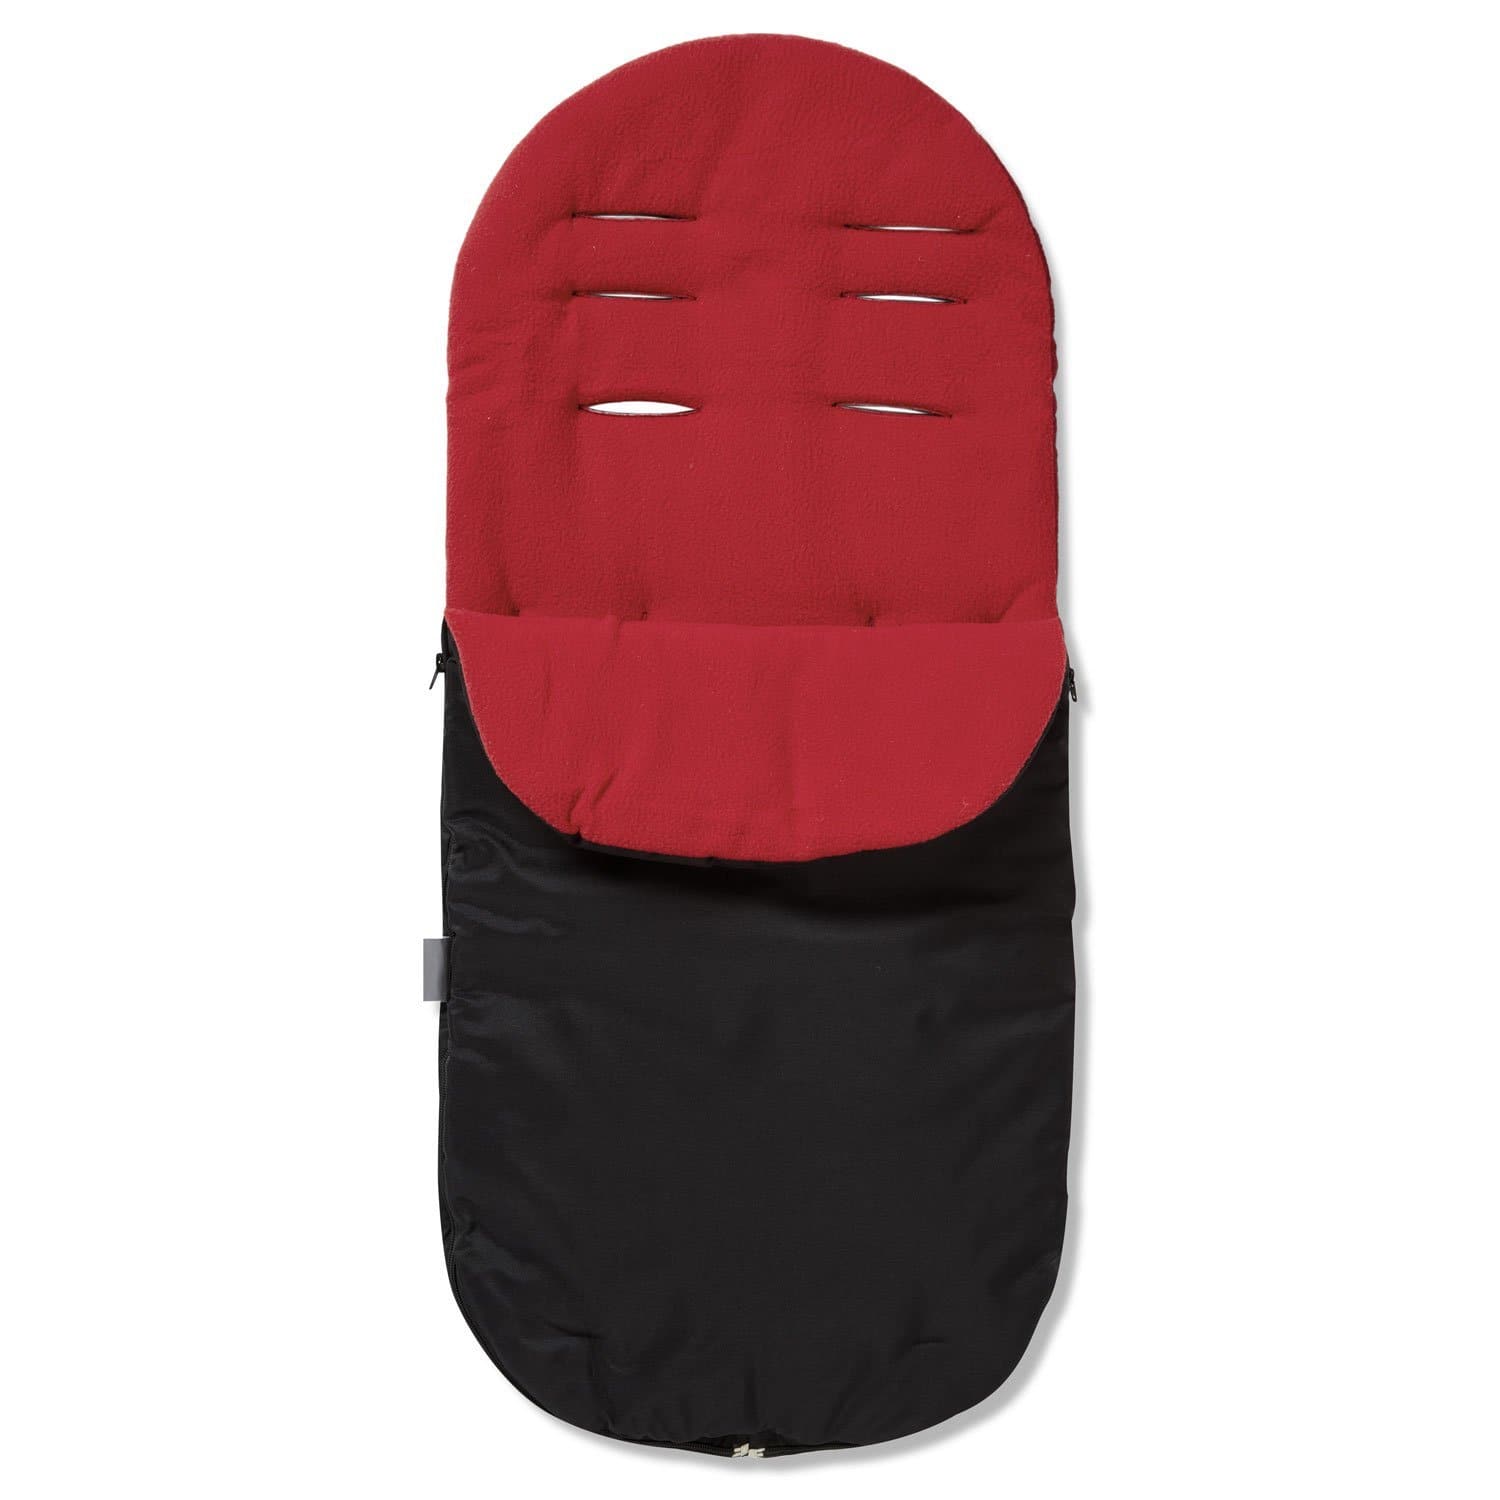 Footmuff / Cosy Toes Compatible with Gesslein - Red / Fits All Models | For Your Little One